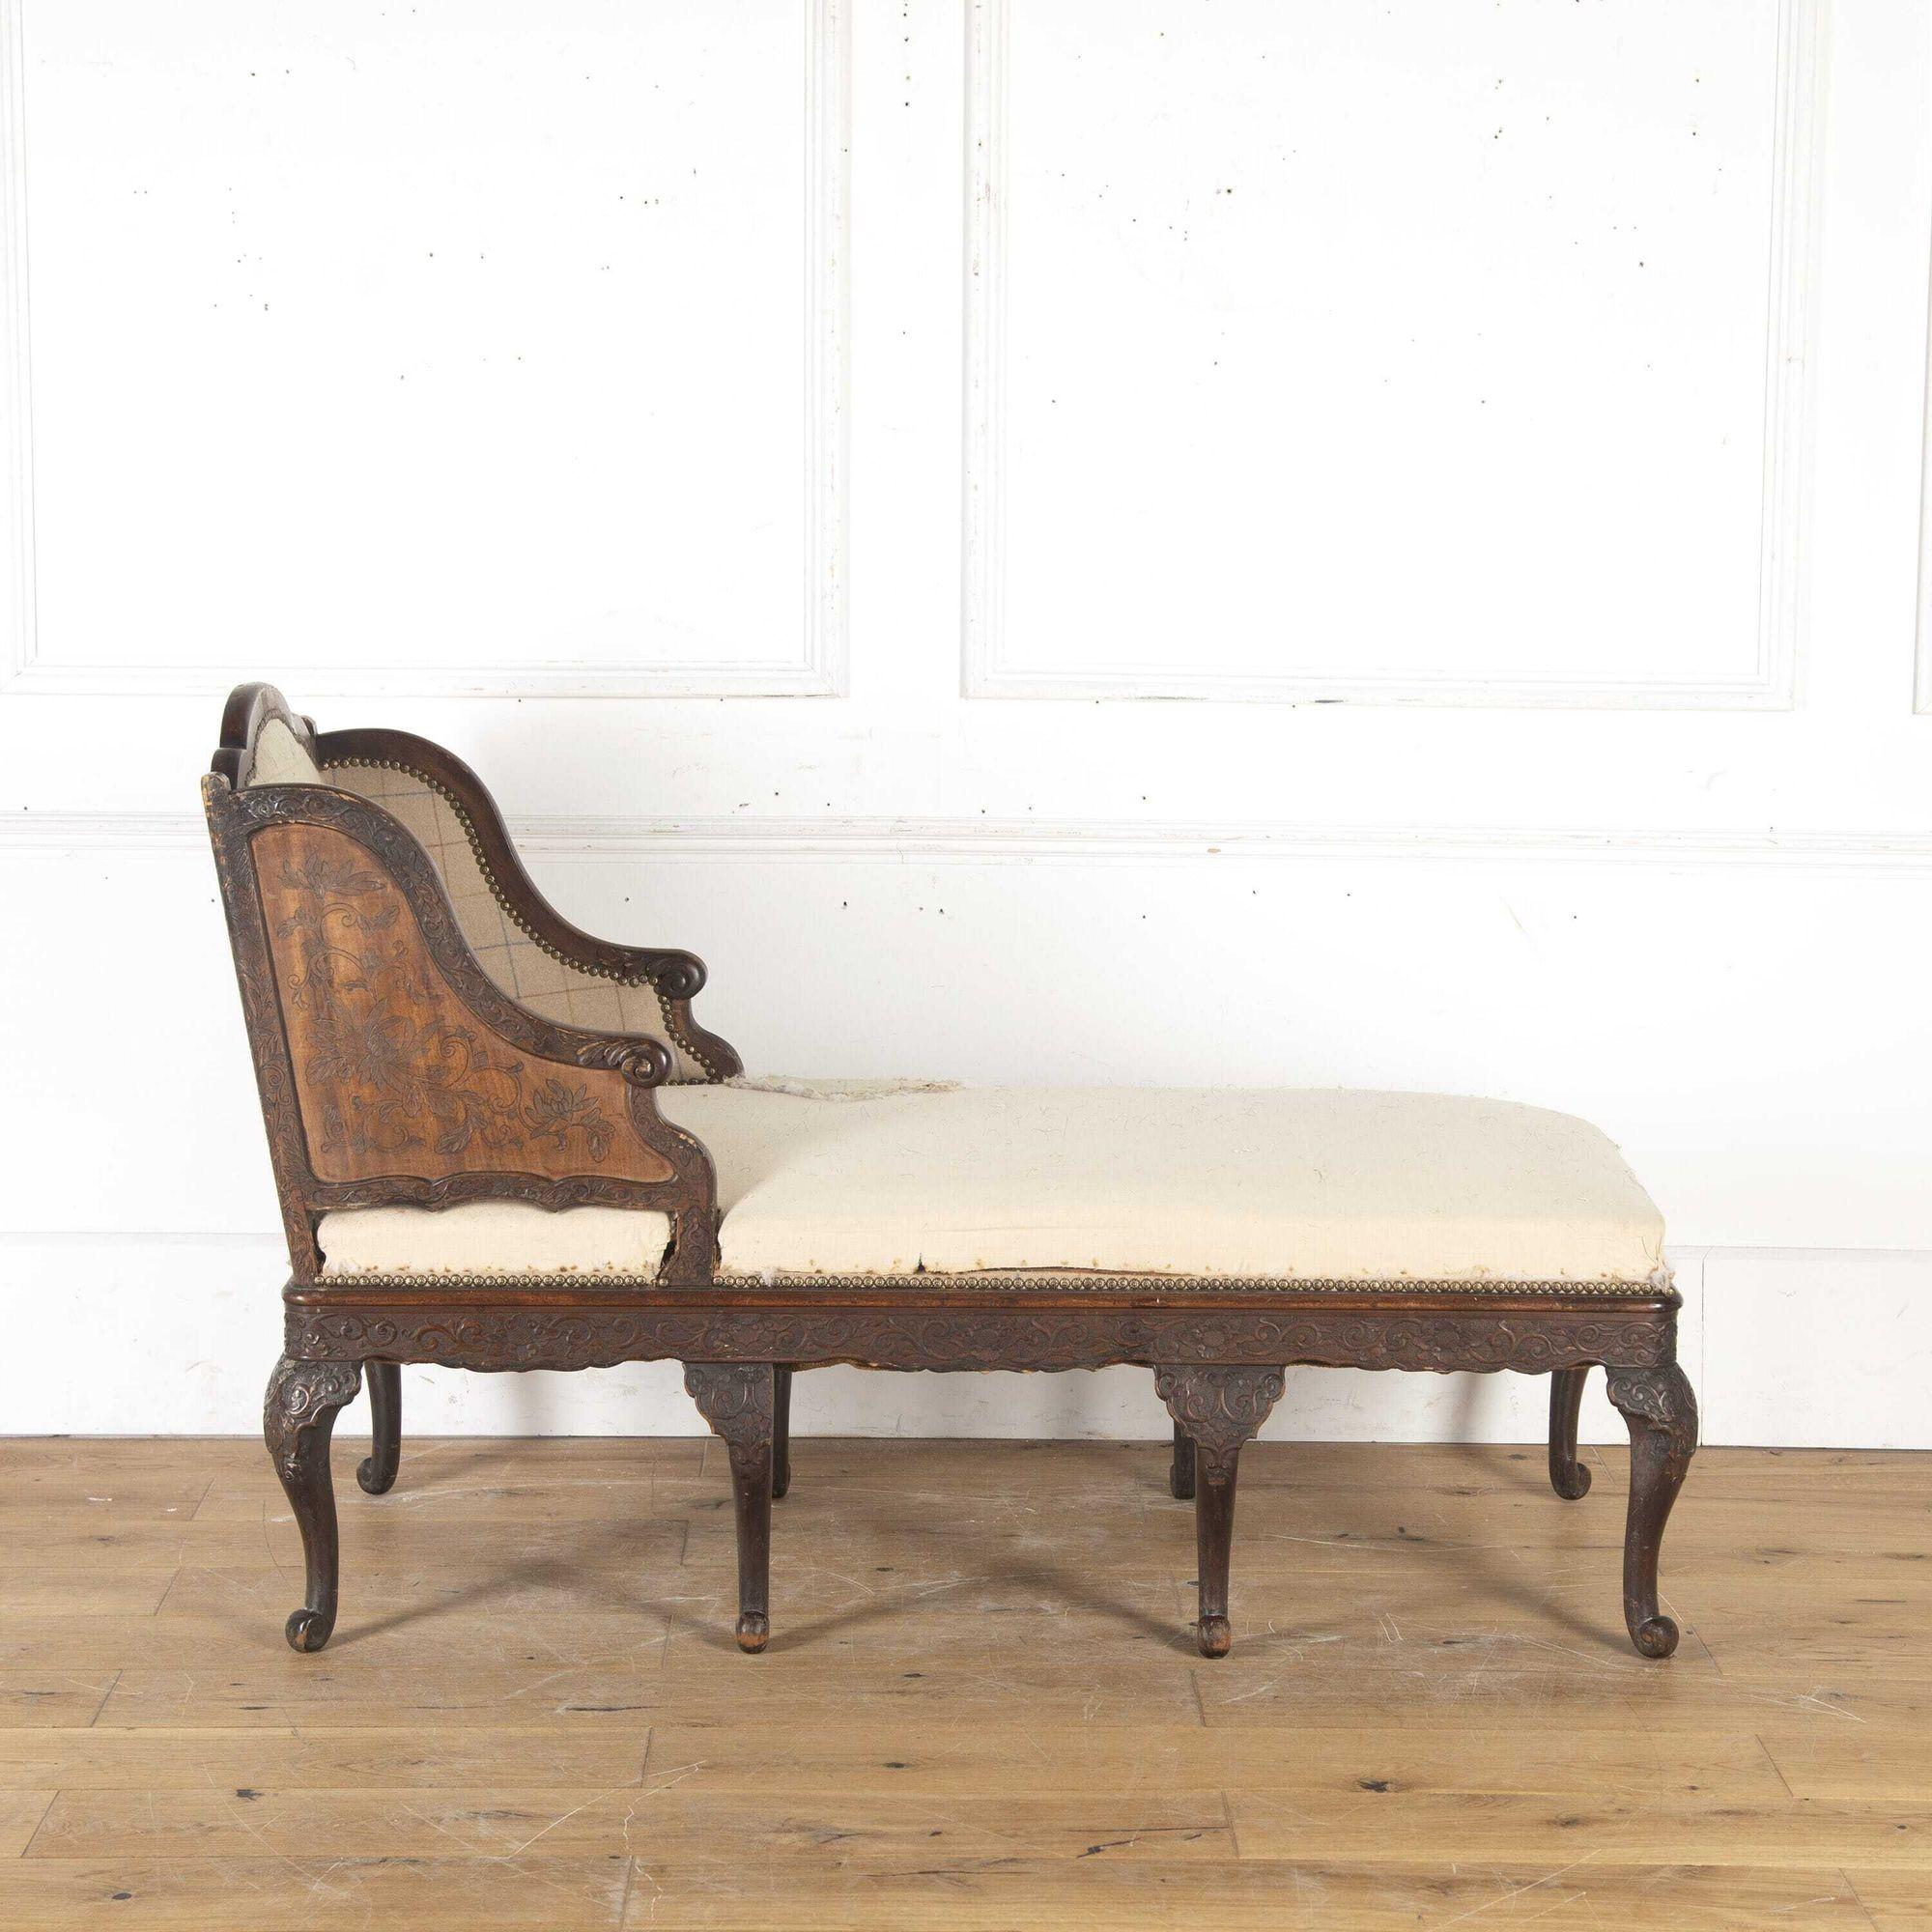 China Trade Carved Daybed For Sale 3